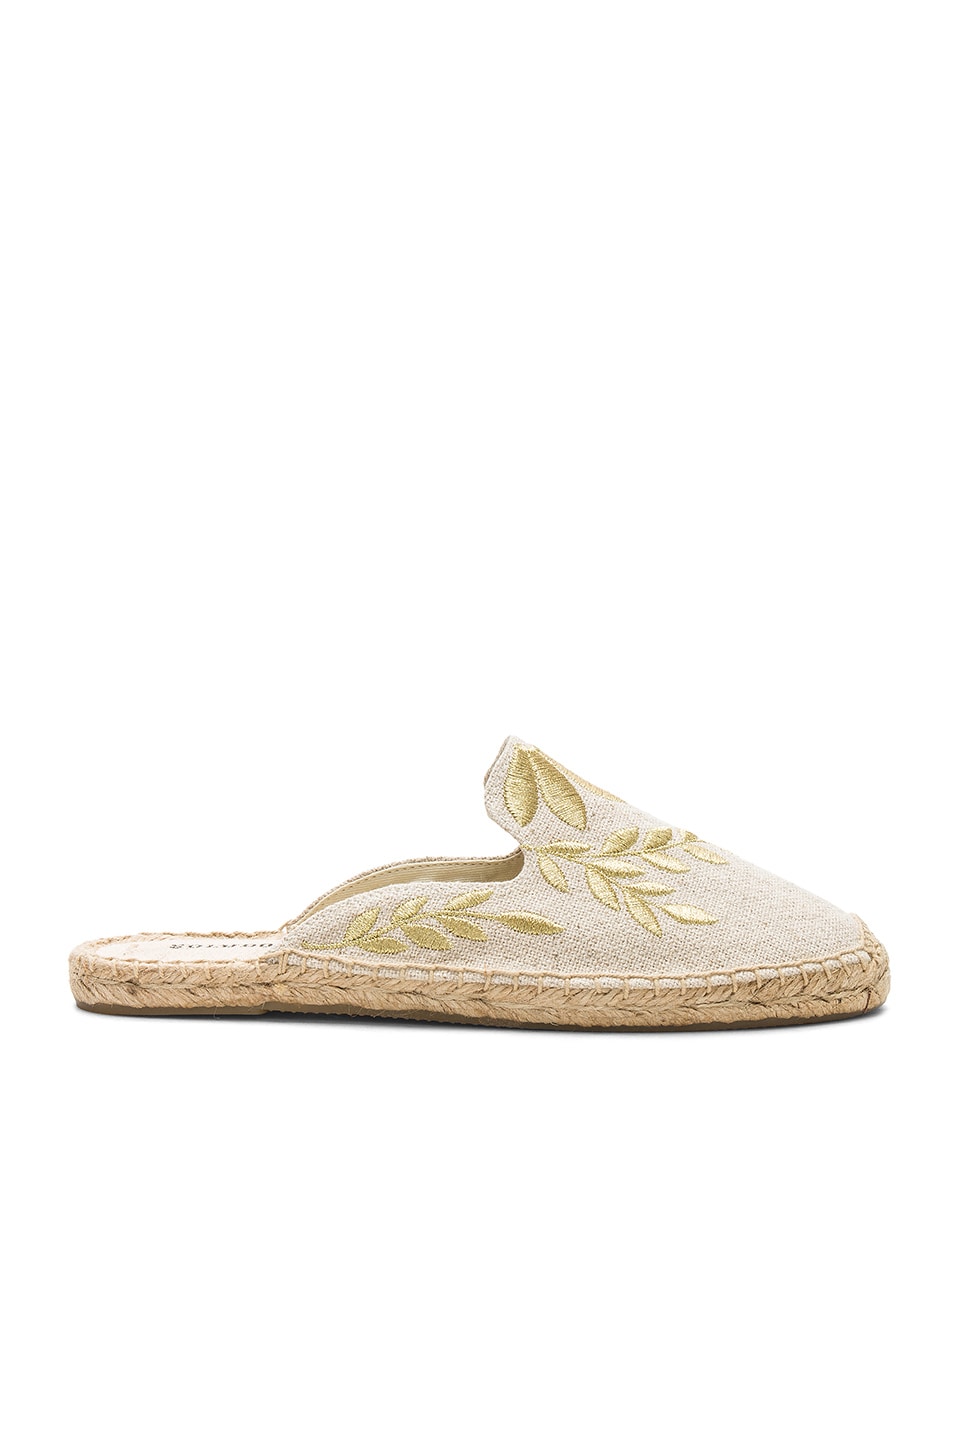 SOLUDOS SOLUDOS EMBROIDERED FLORAL MULE IN BEIGE.,SOLU-WZ262